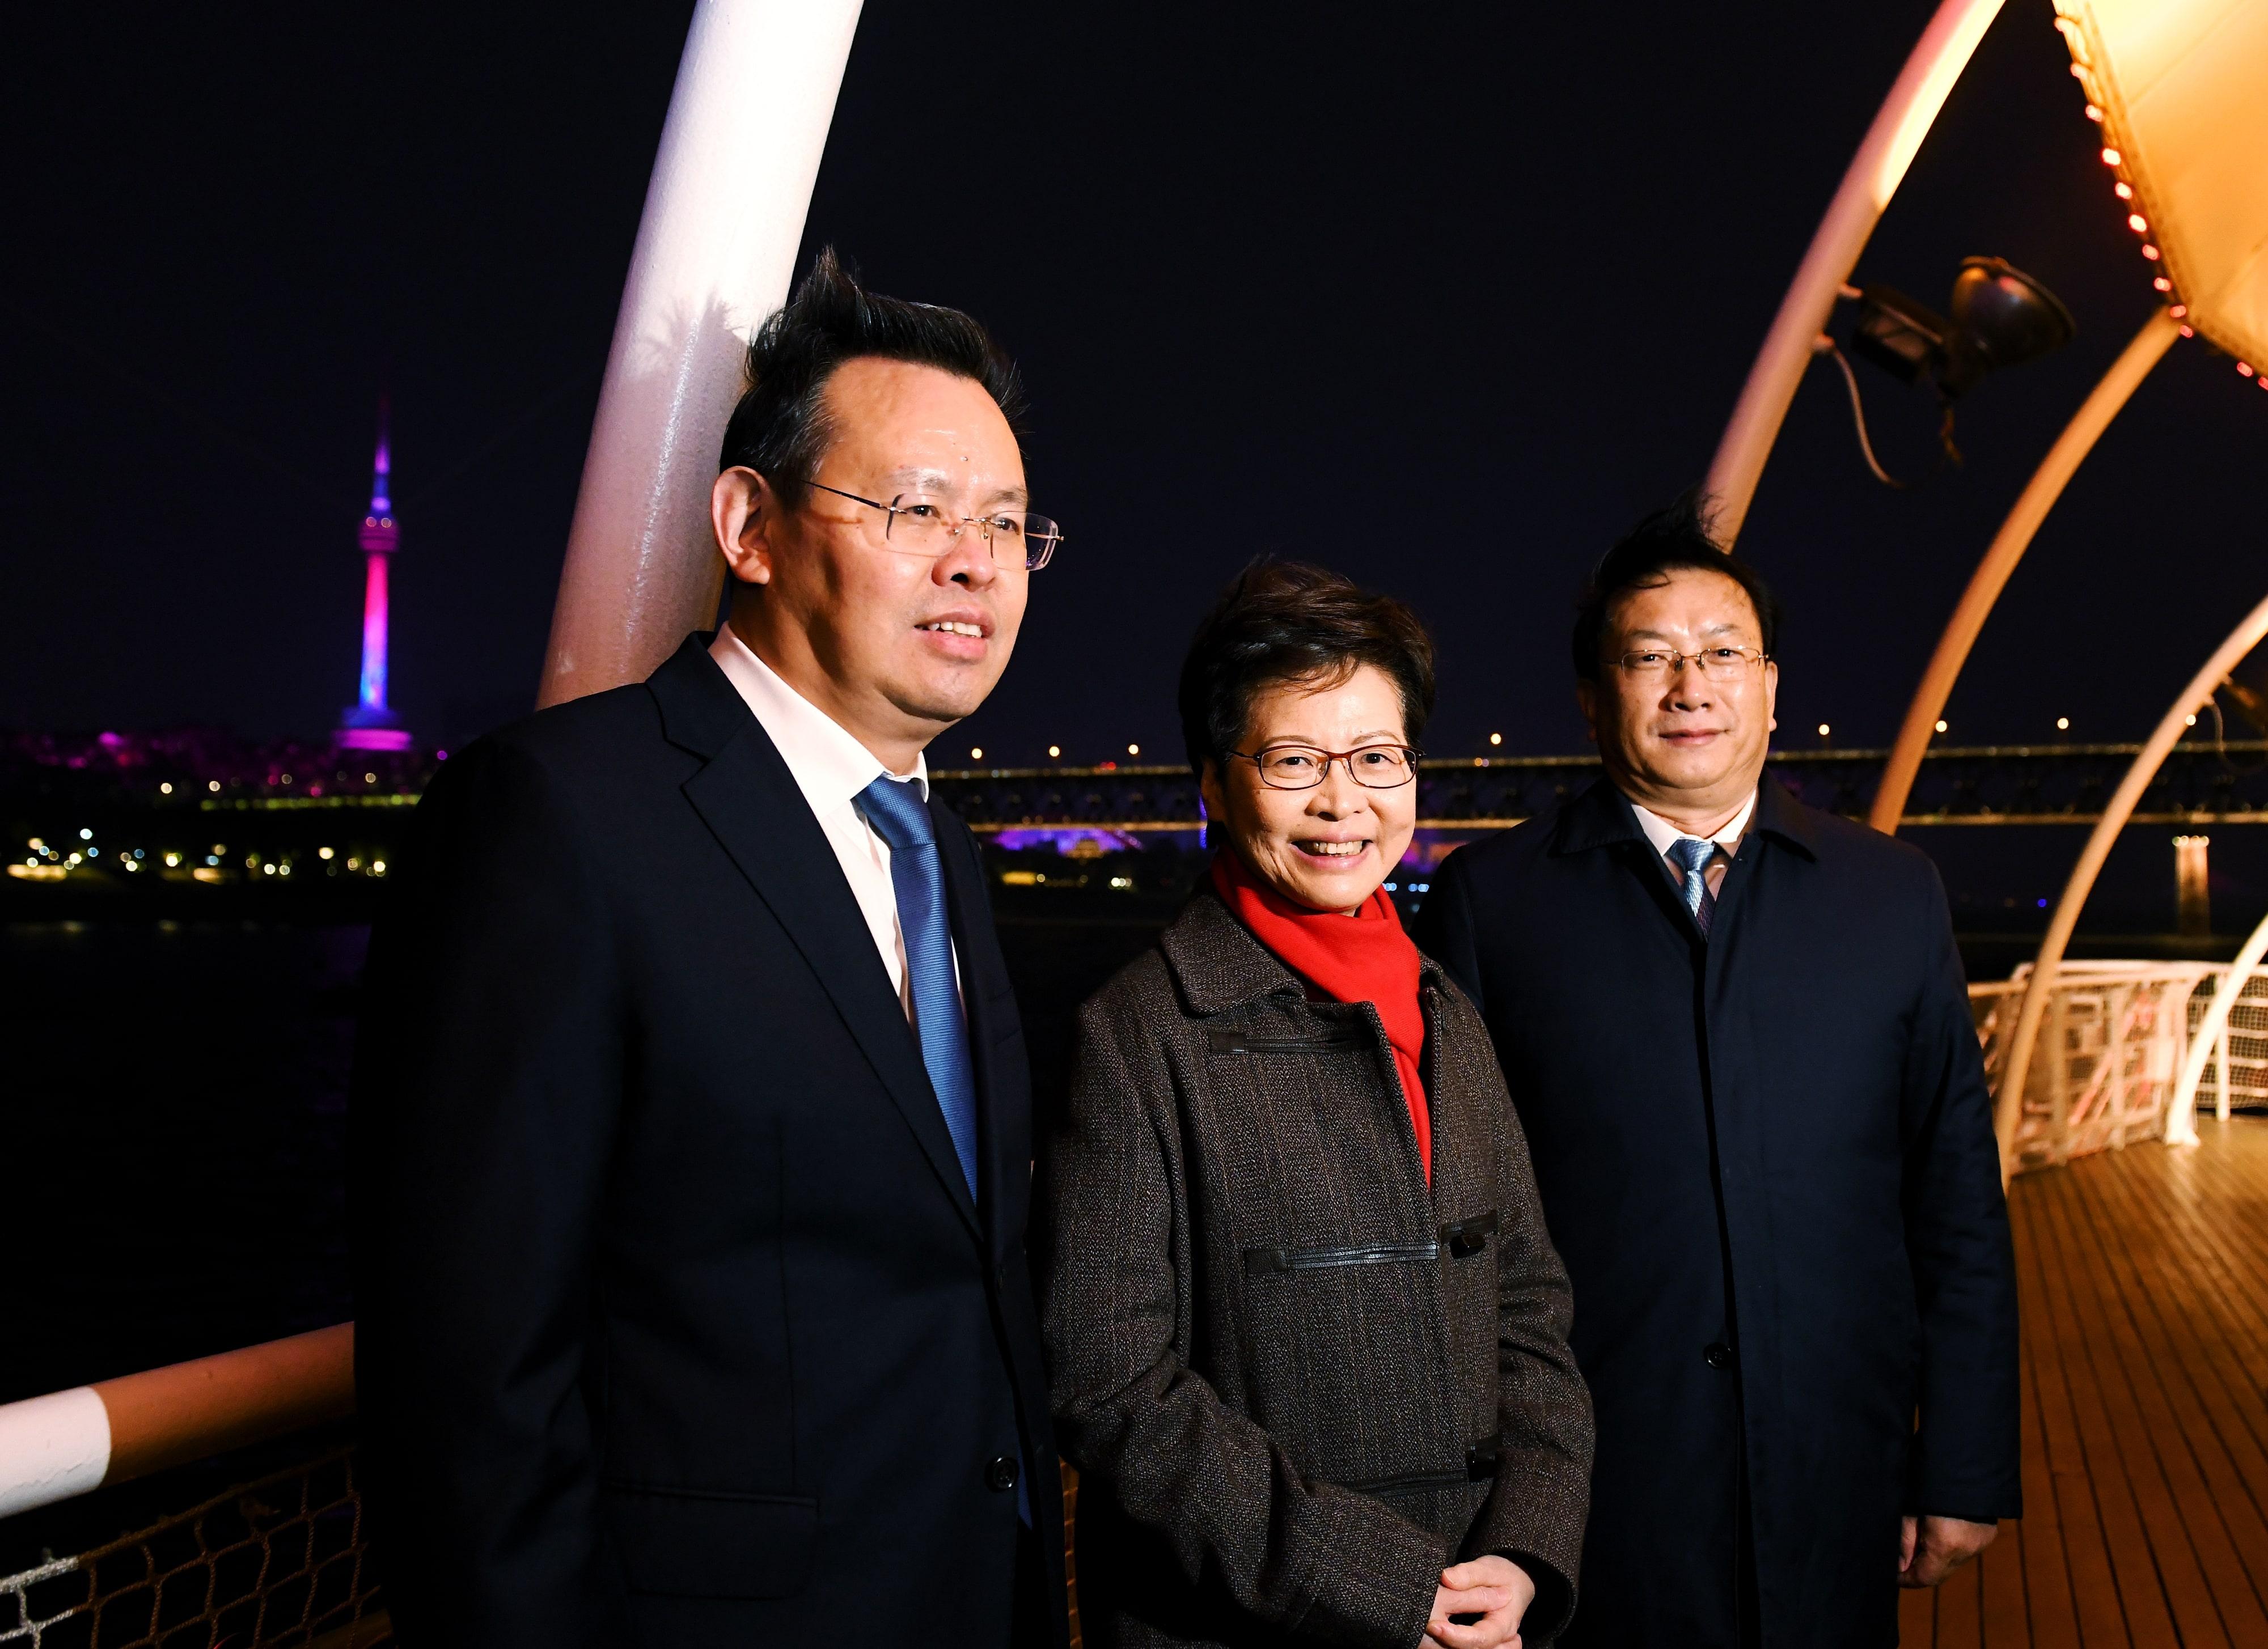 The Chief Executive, Mrs Carrie Lam (centre), accompanied by the Governor of Hubei Province, Mr Wang Zhonglin (right) and Mayor of Wuhan, Mr Cheng Yongwen (left), toured Yangtze River in Wuhan tonight (November 29).